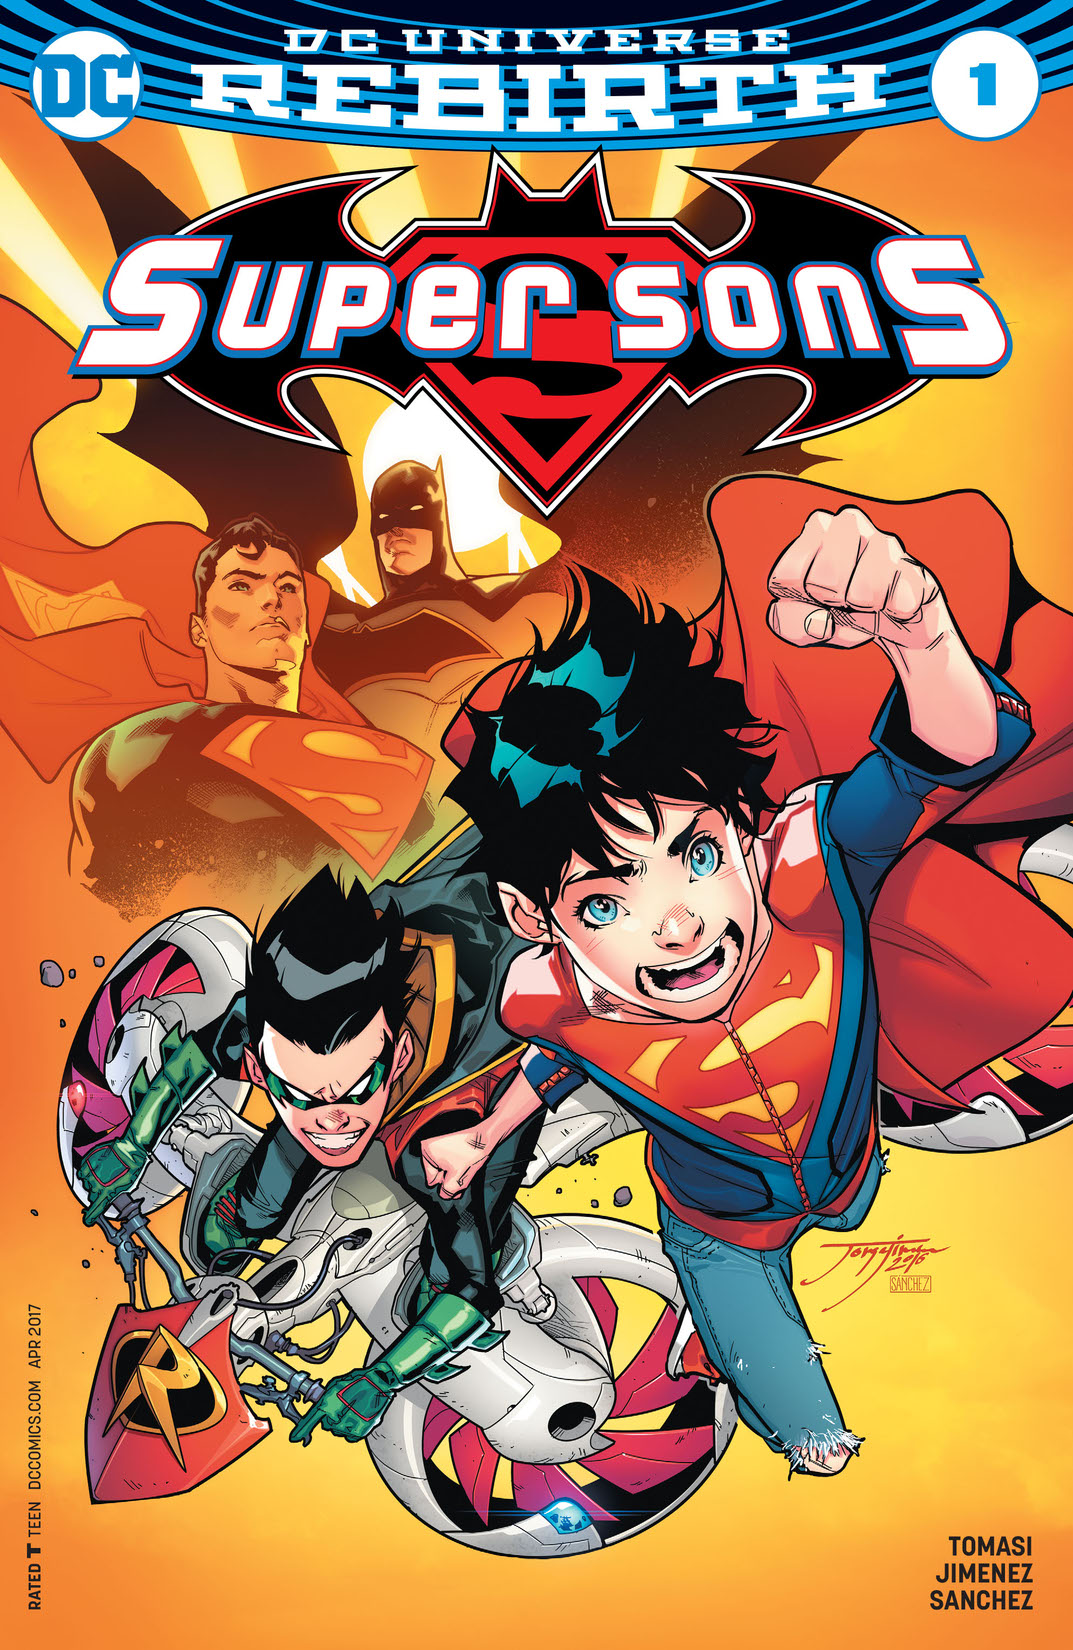 Super Sons (2017-) #1 preview images